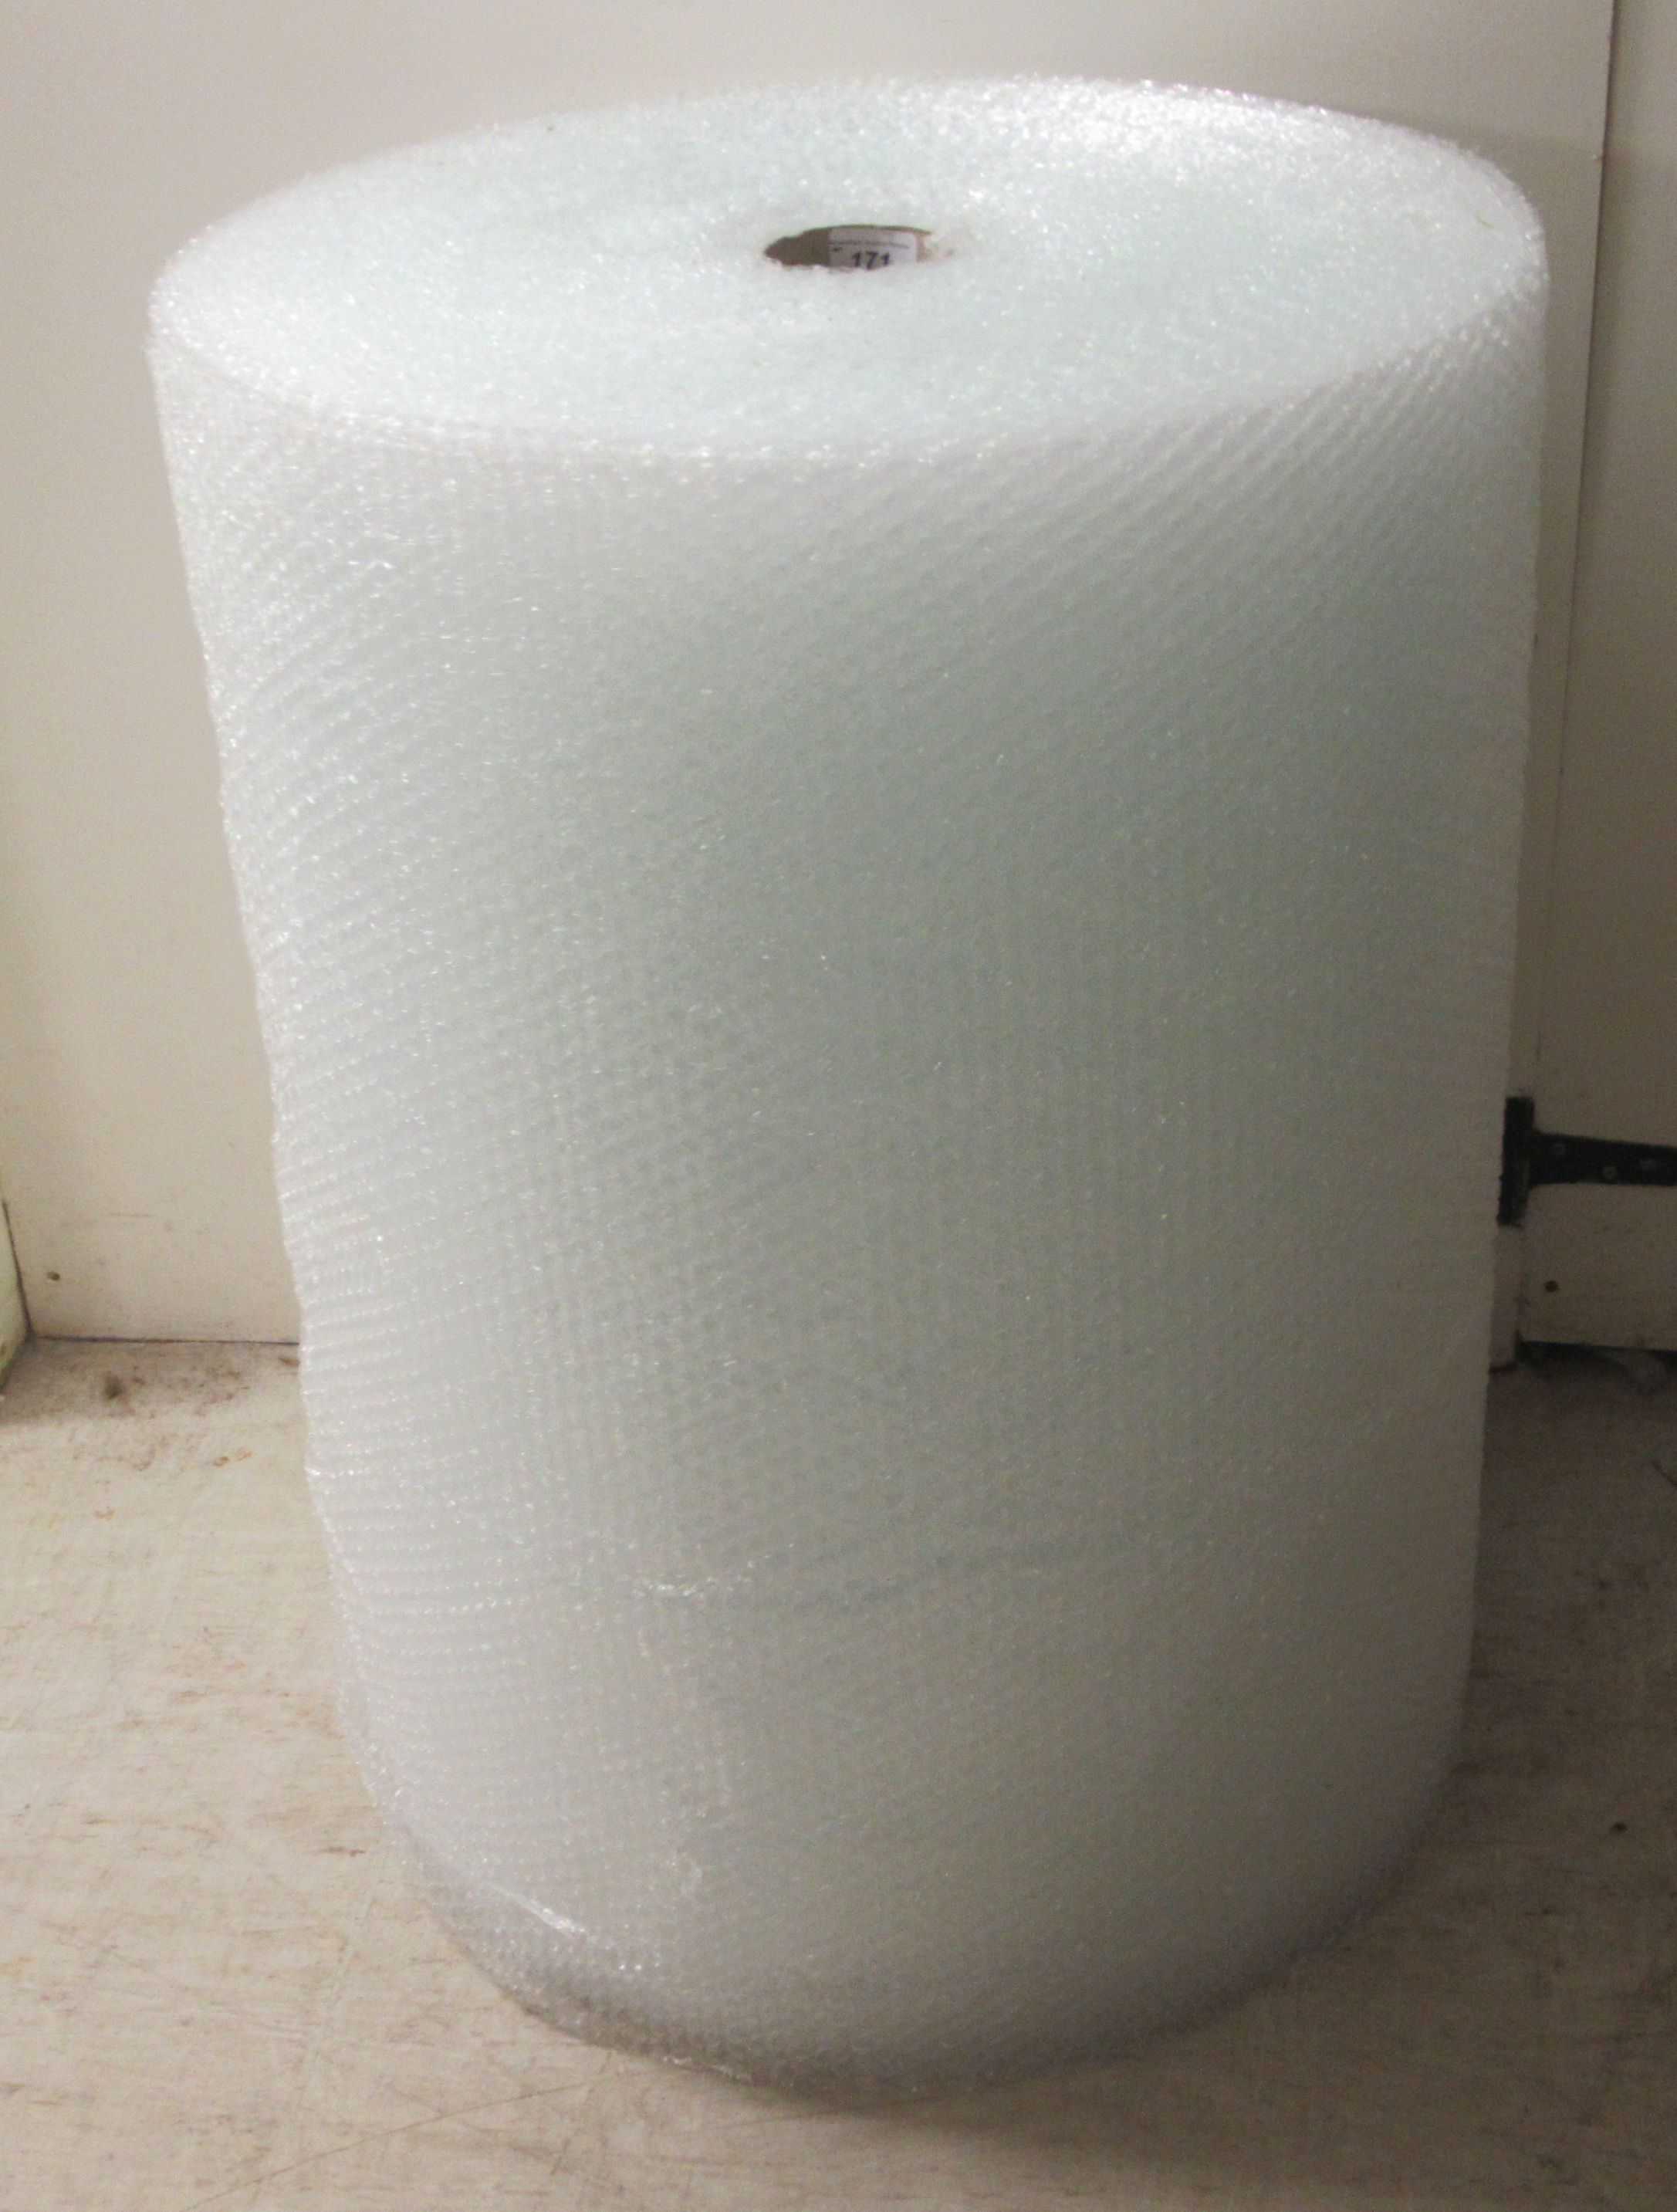 A 100m roll of bubble wrap